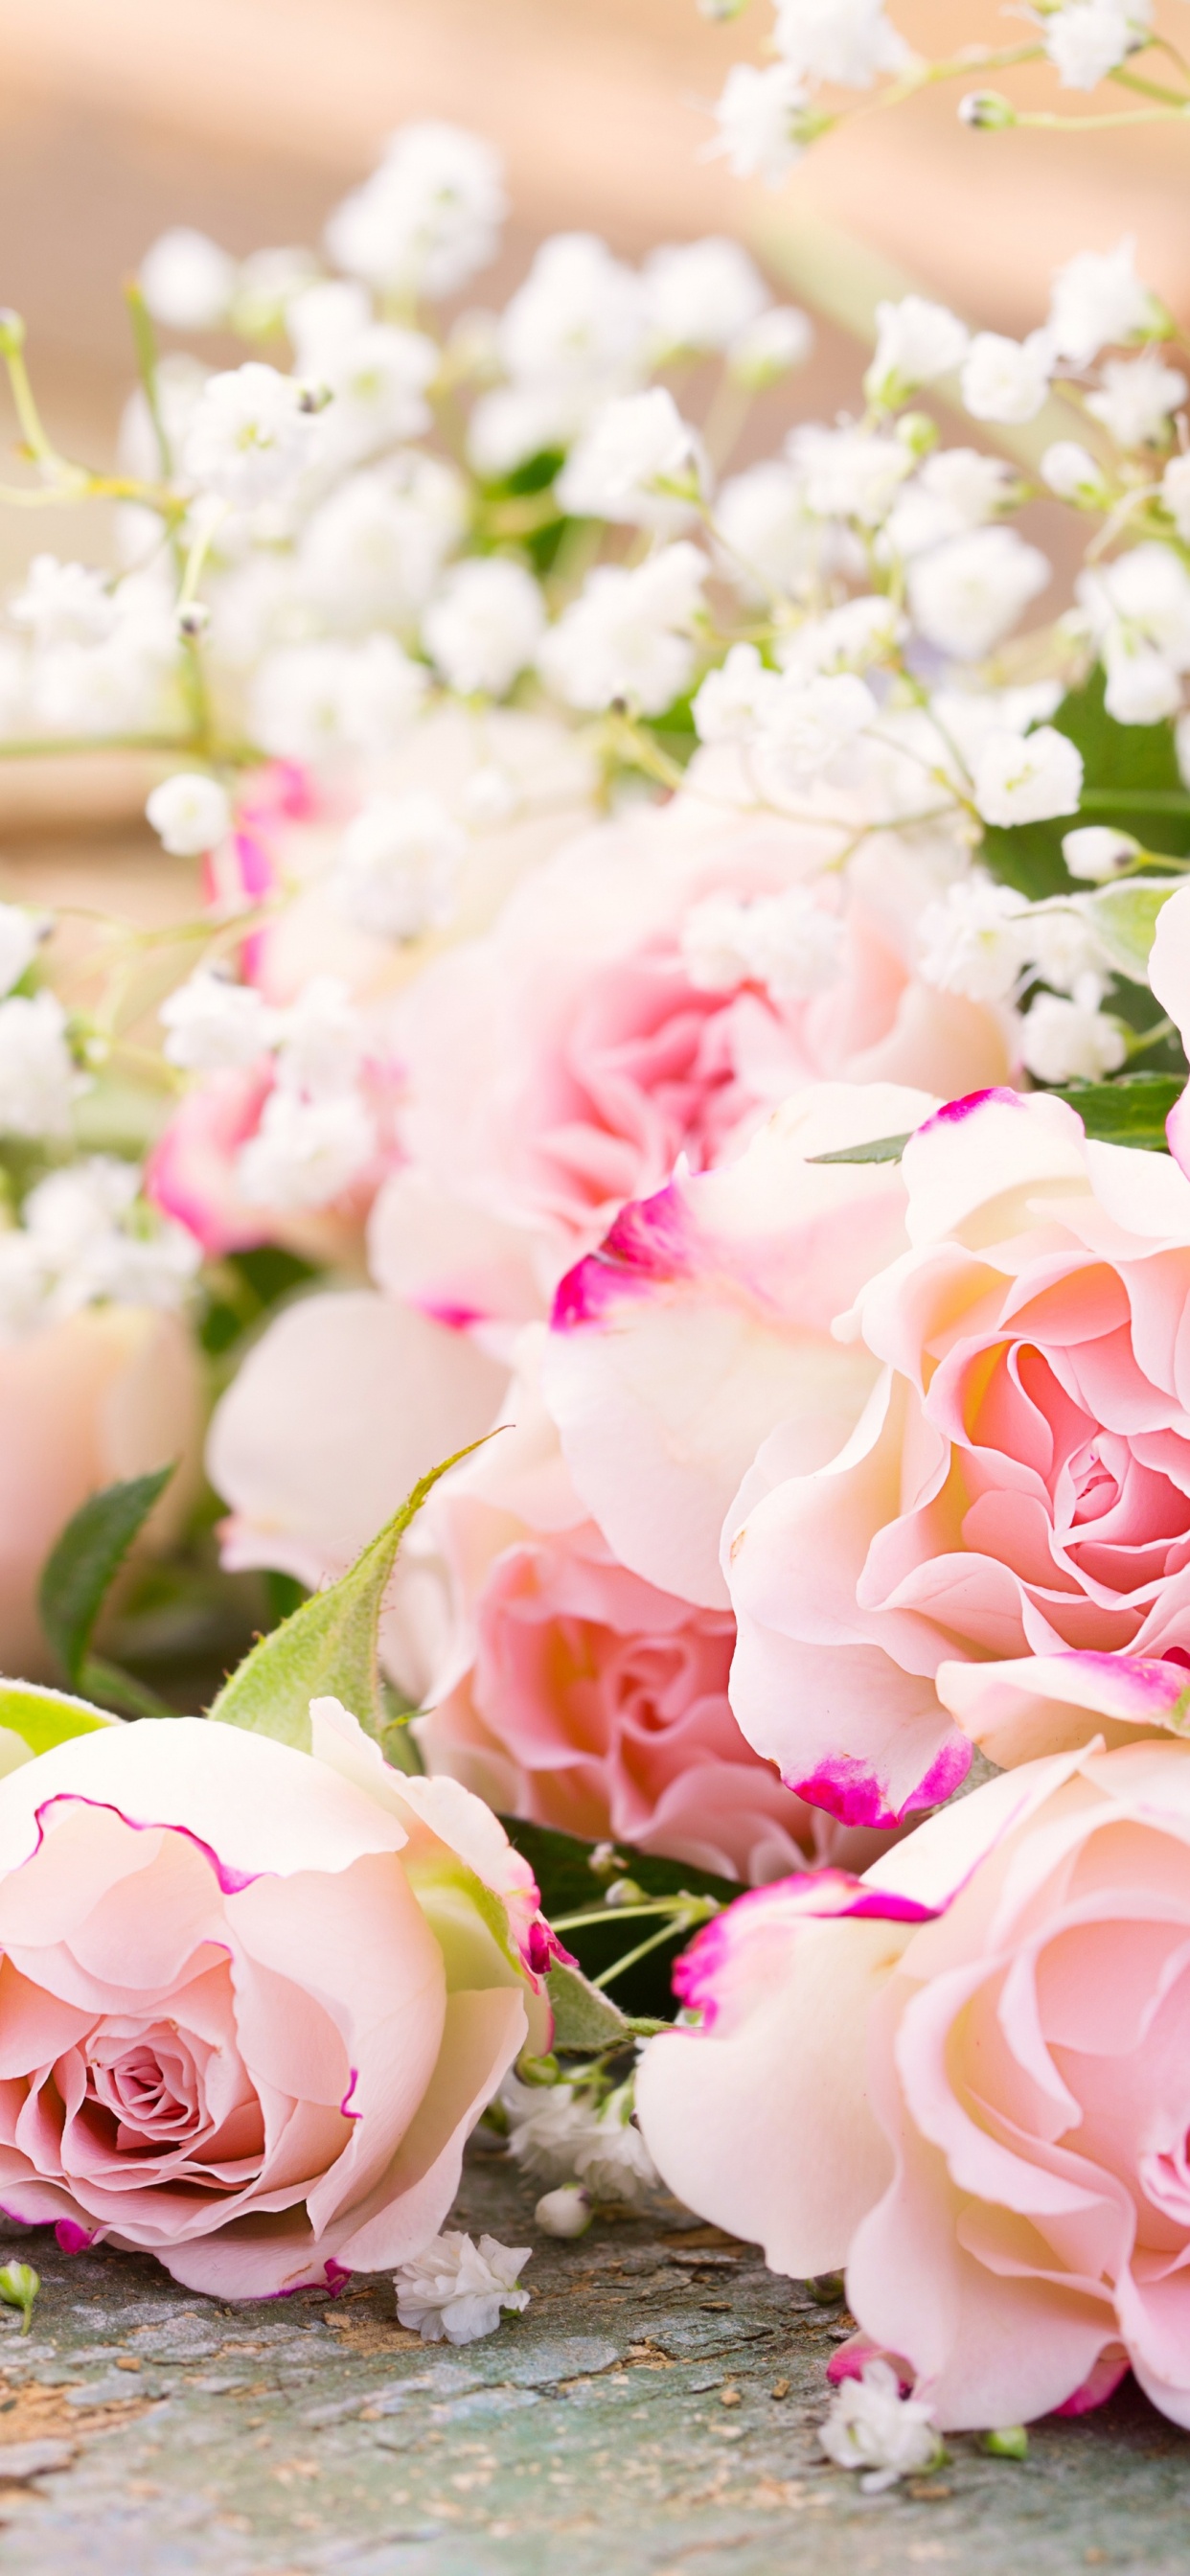 Pink and White Roses Bouquet. Wallpaper in 1242x2688 Resolution